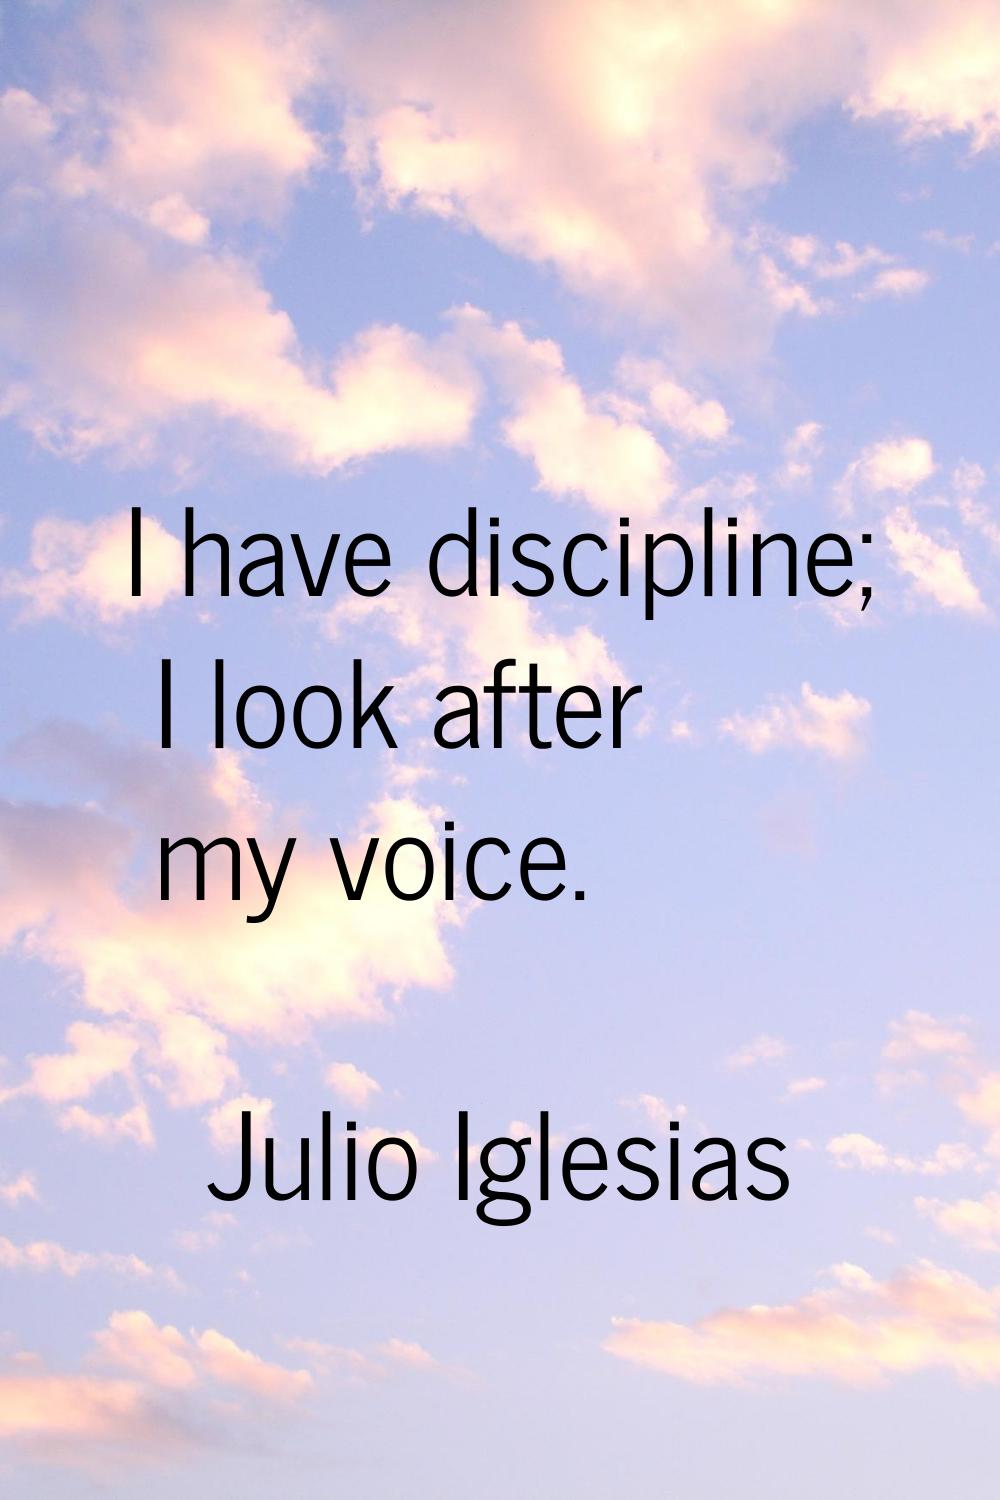 I have discipline; I look after my voice.